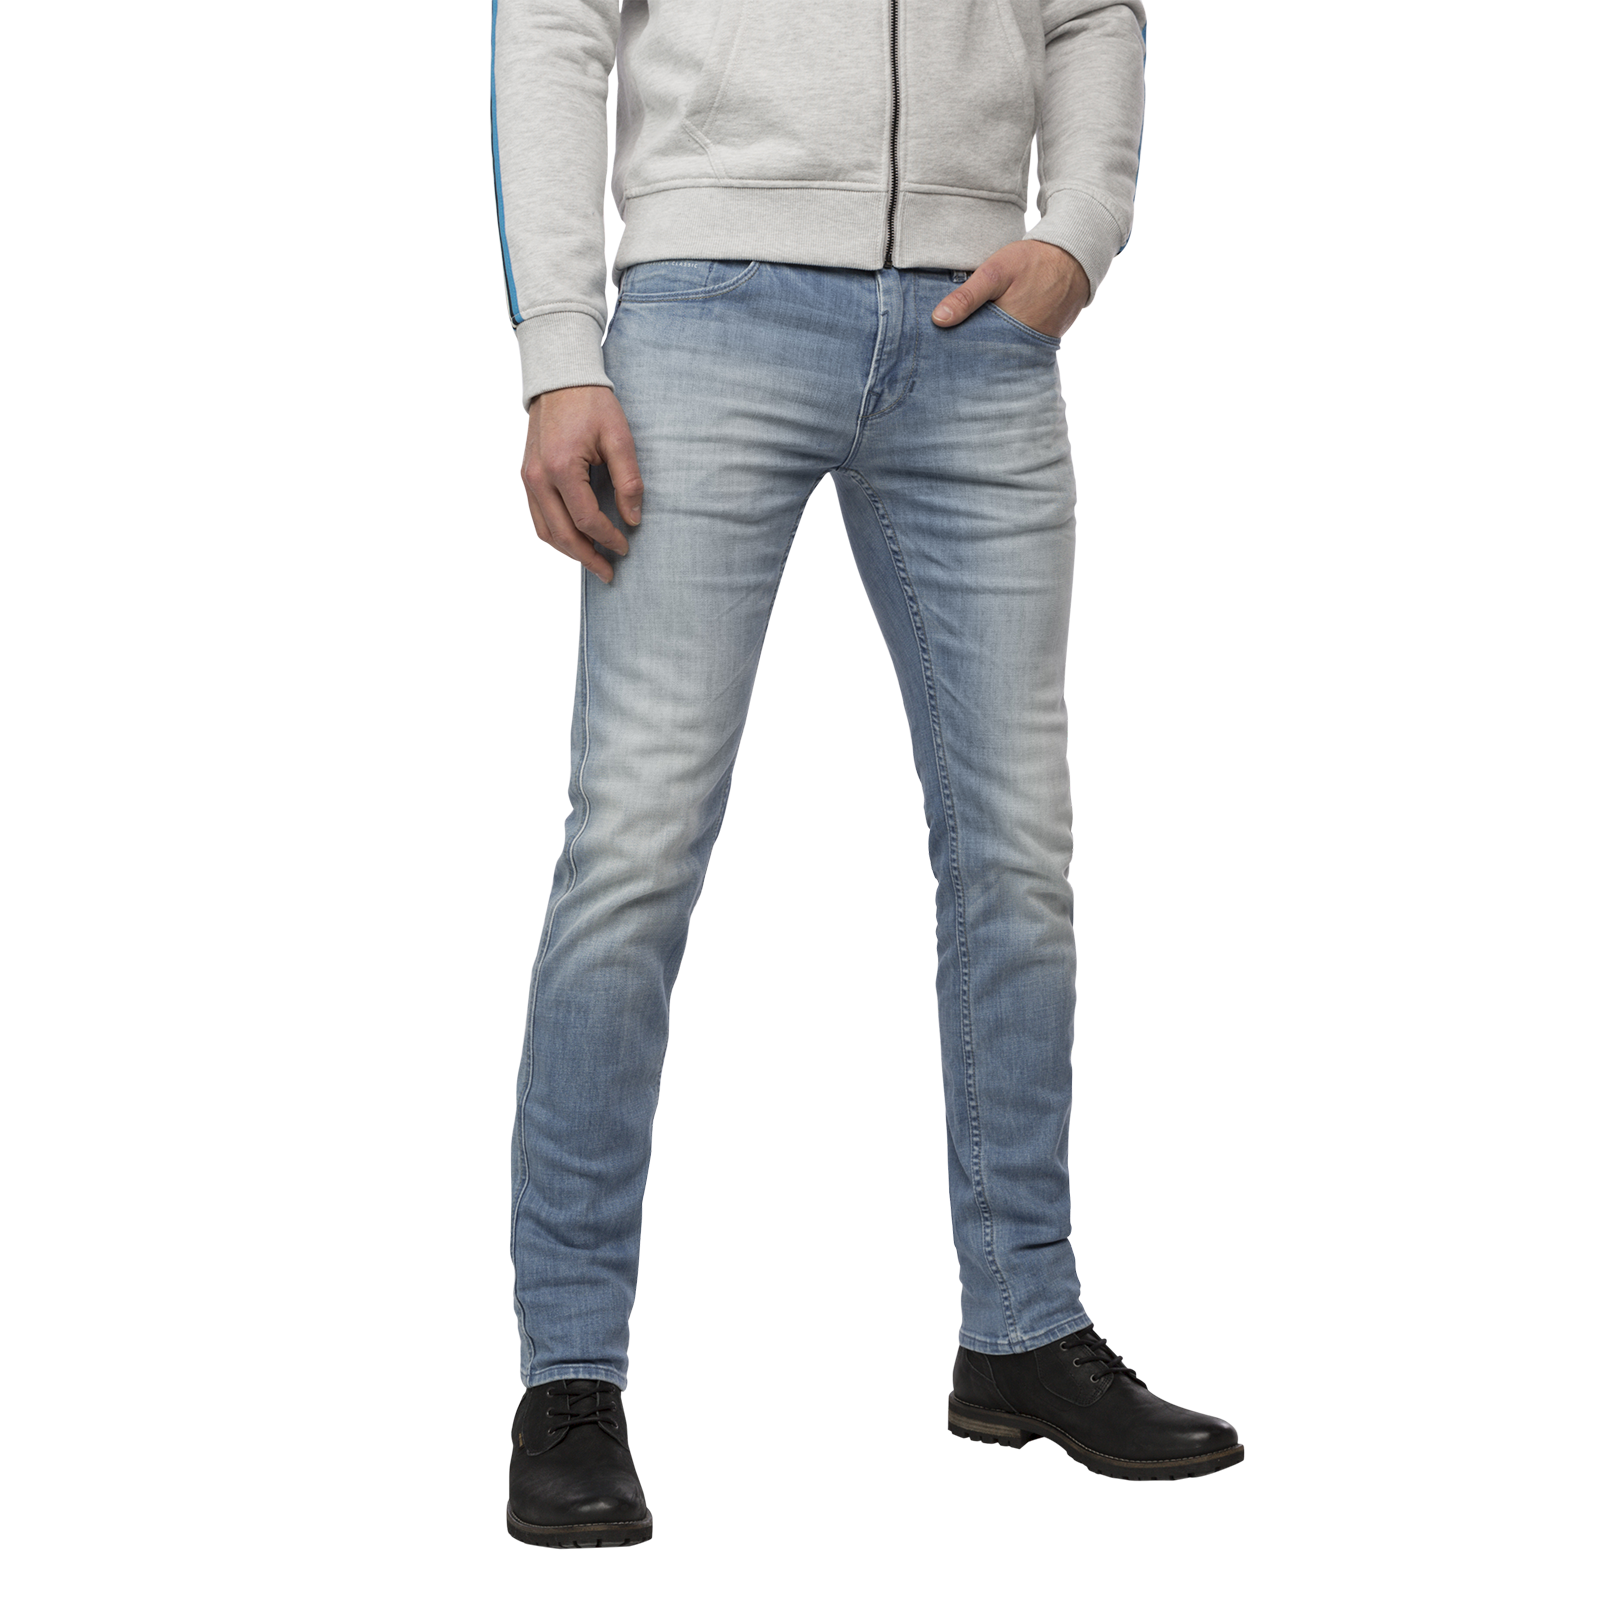 PME jeans - KING Jeans & Casuals